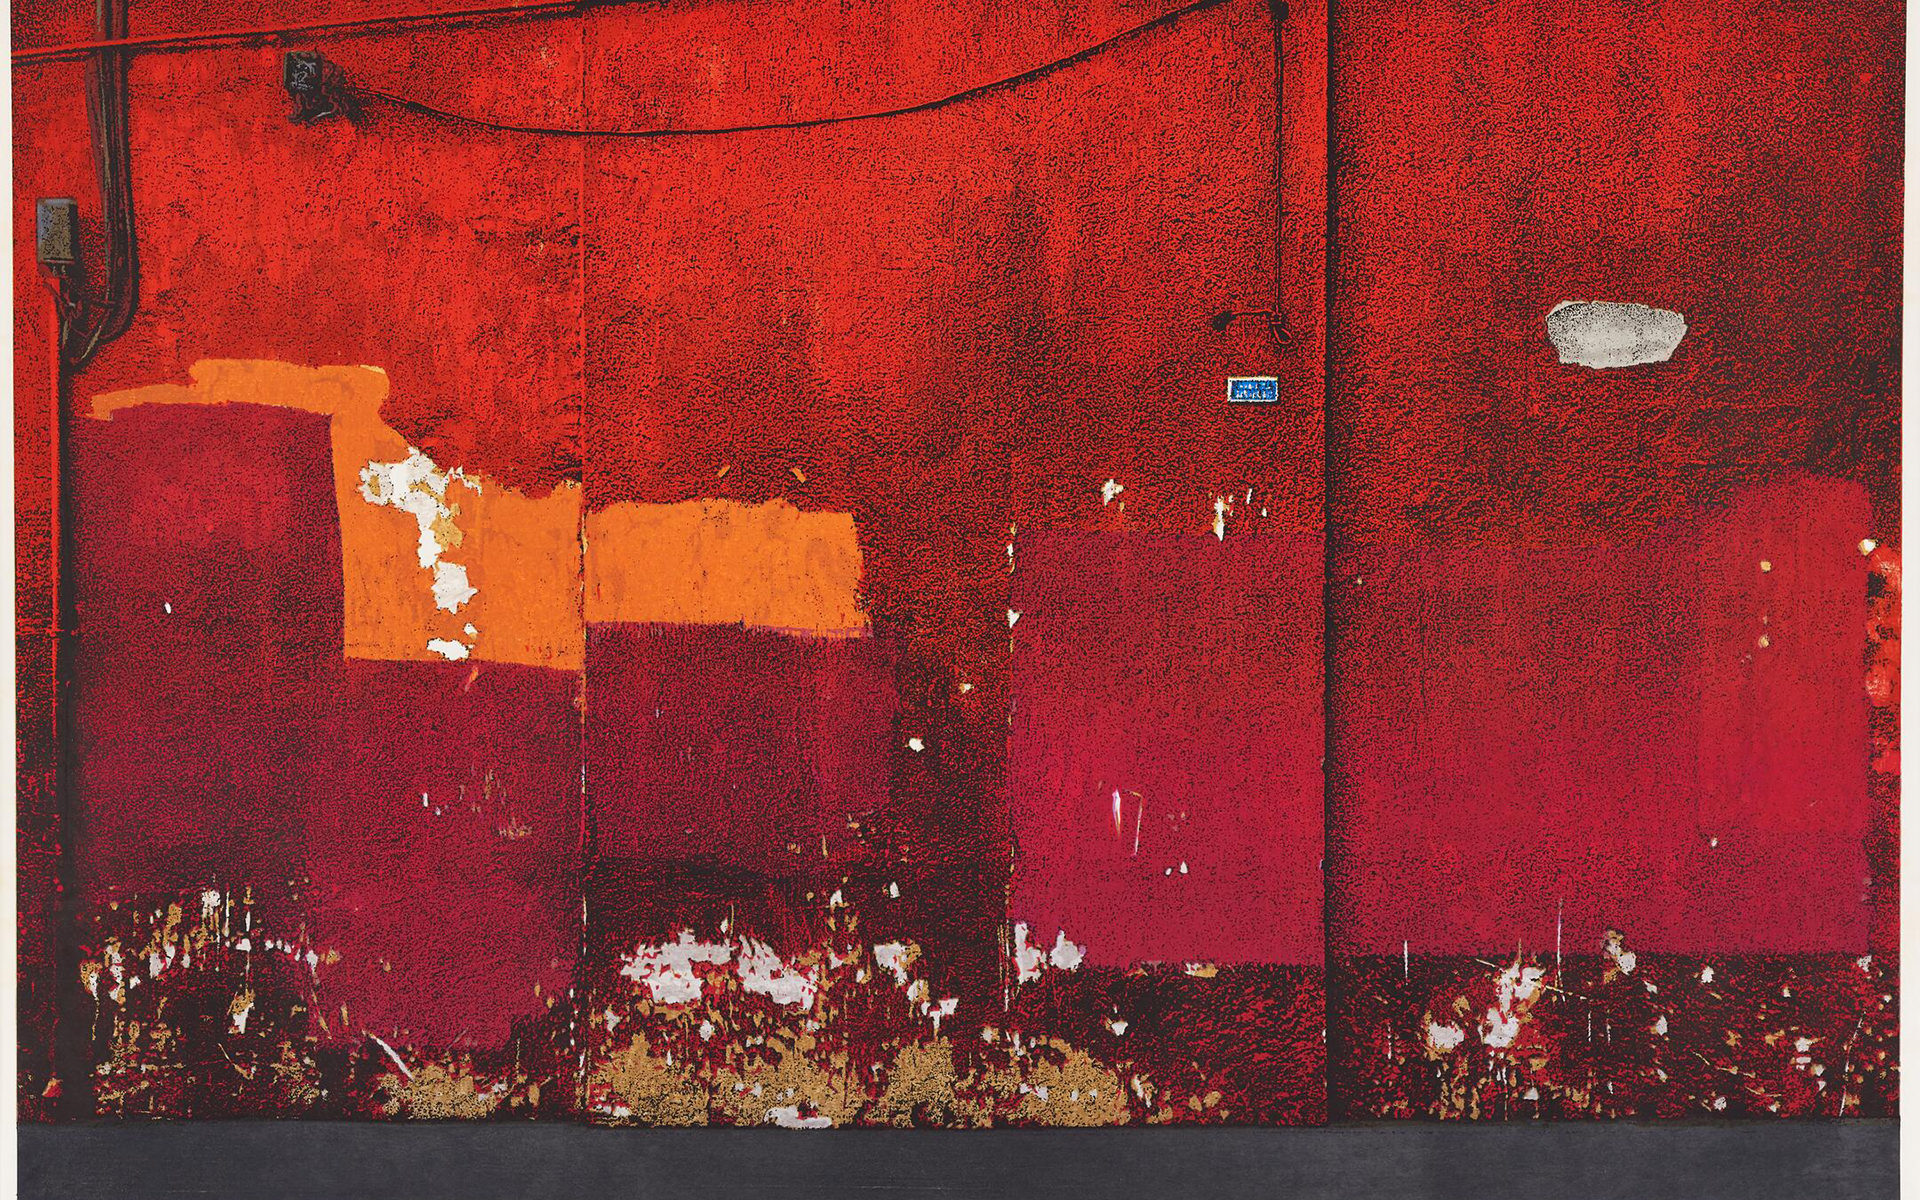 Abstracted rendering of a scuffed red wall.